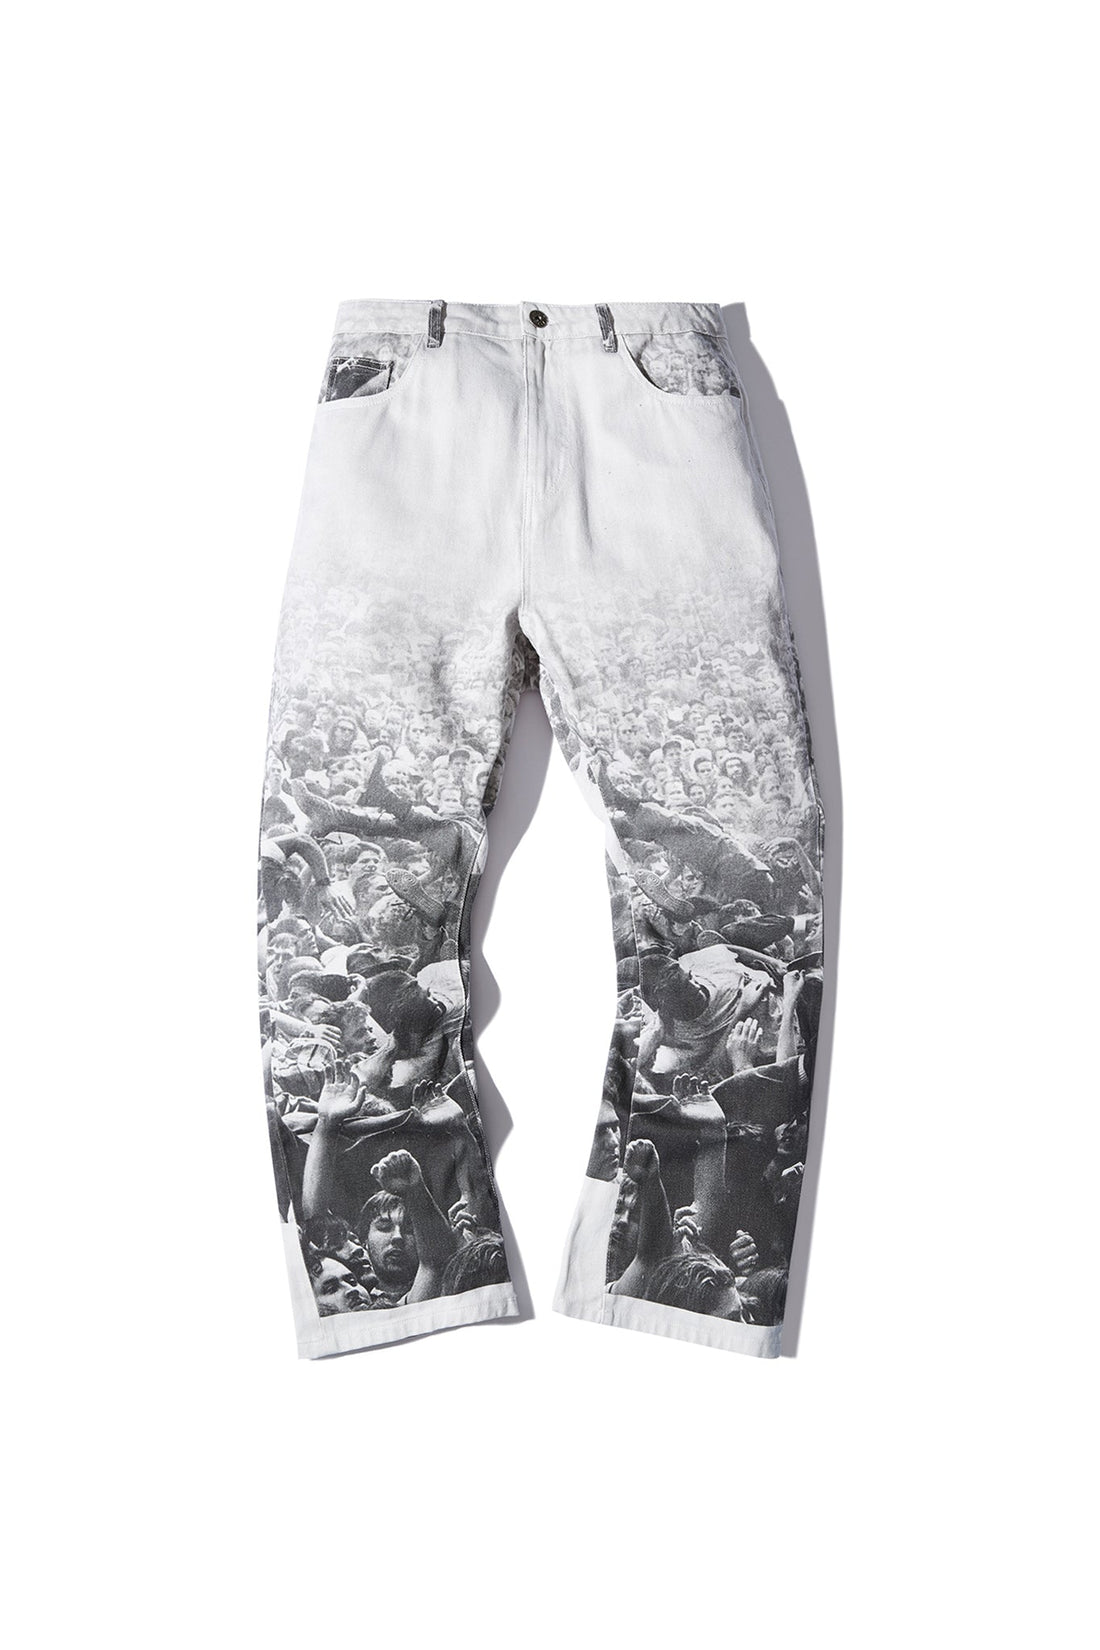 CROWD PANTS WHITE Acupuncture